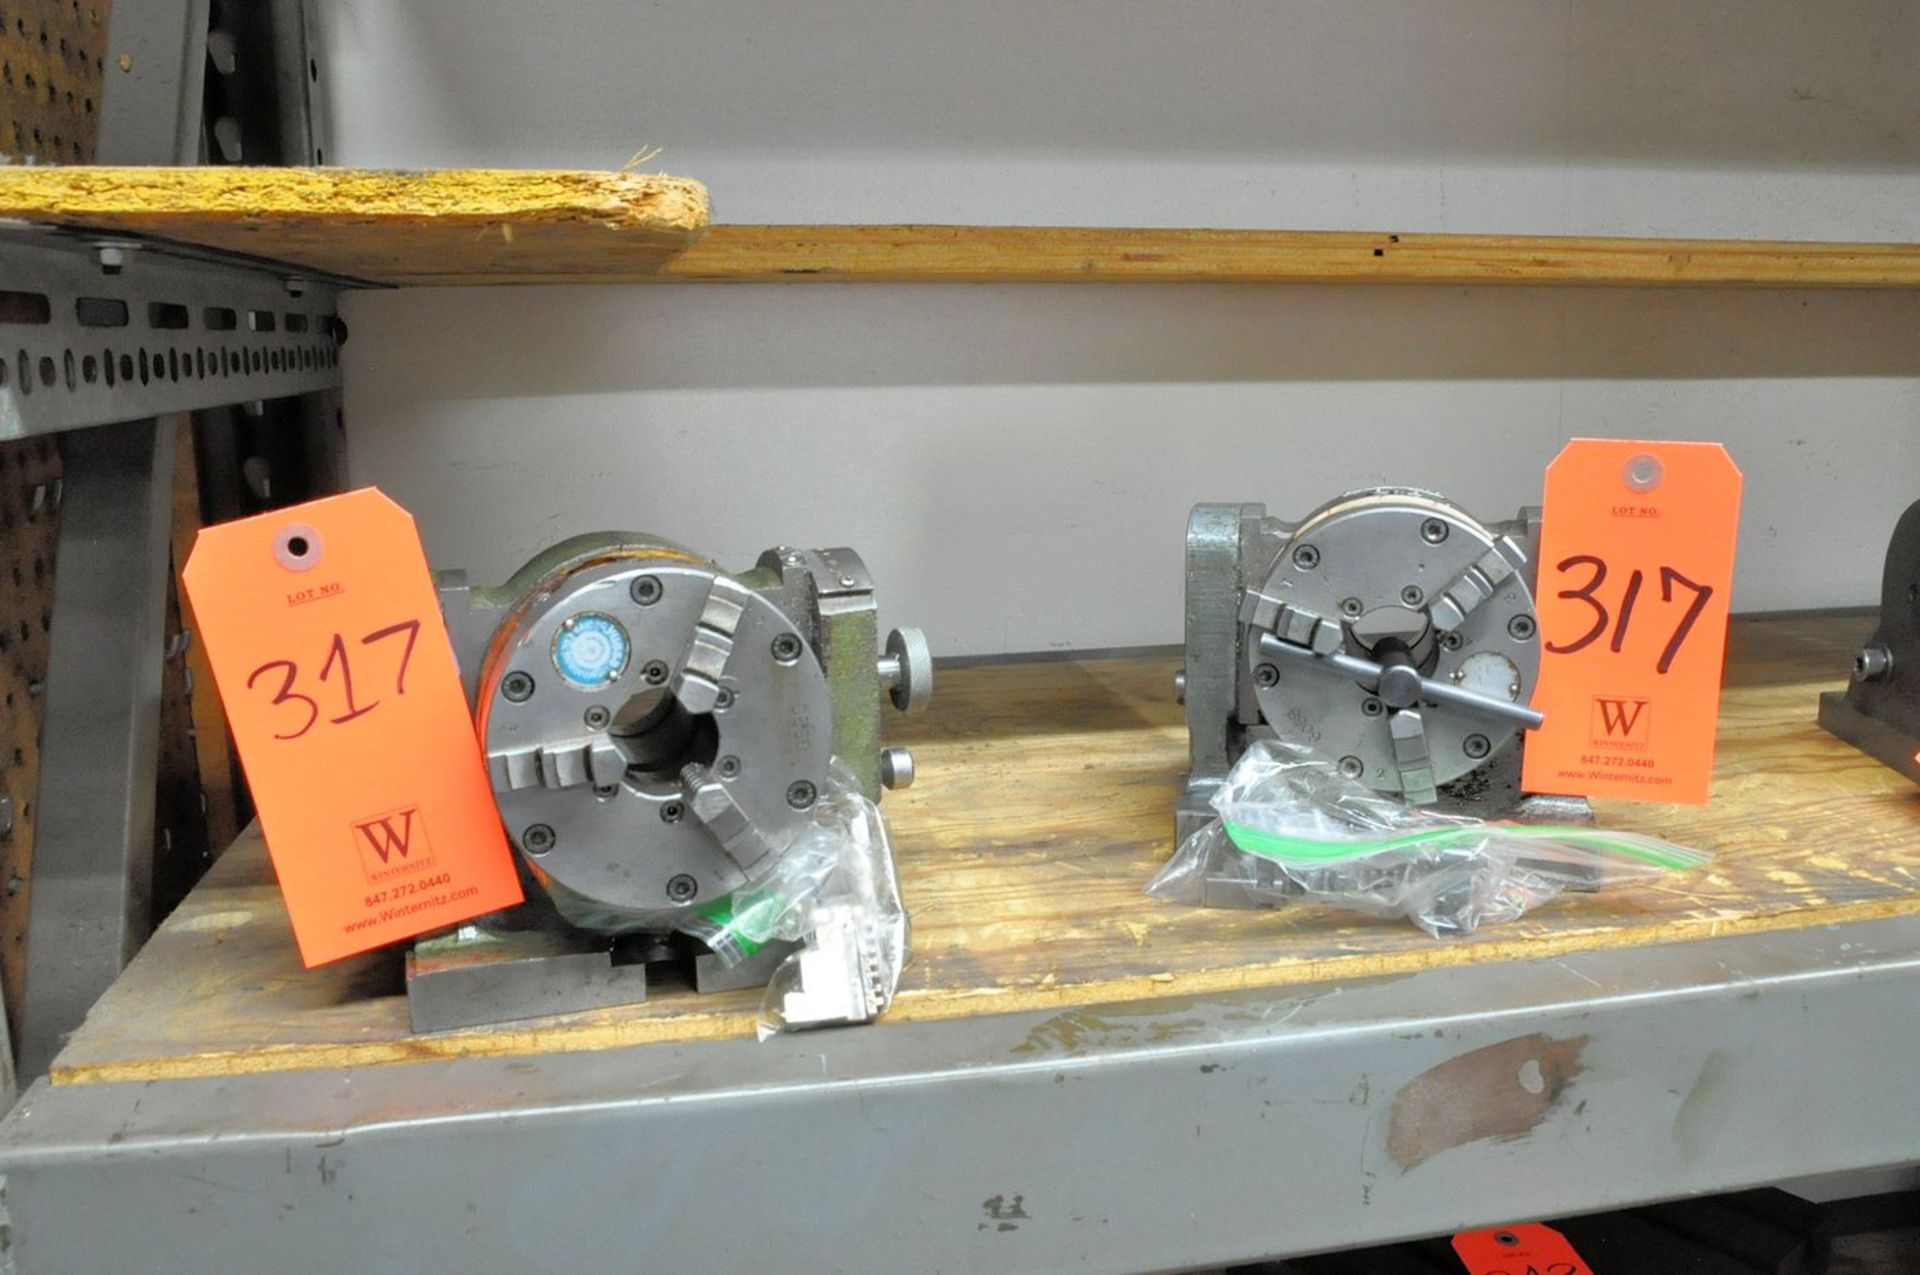 Lot - (2) 5C Collet Indexing Fixtures with 4" 3-Jaw Chuck Attachments